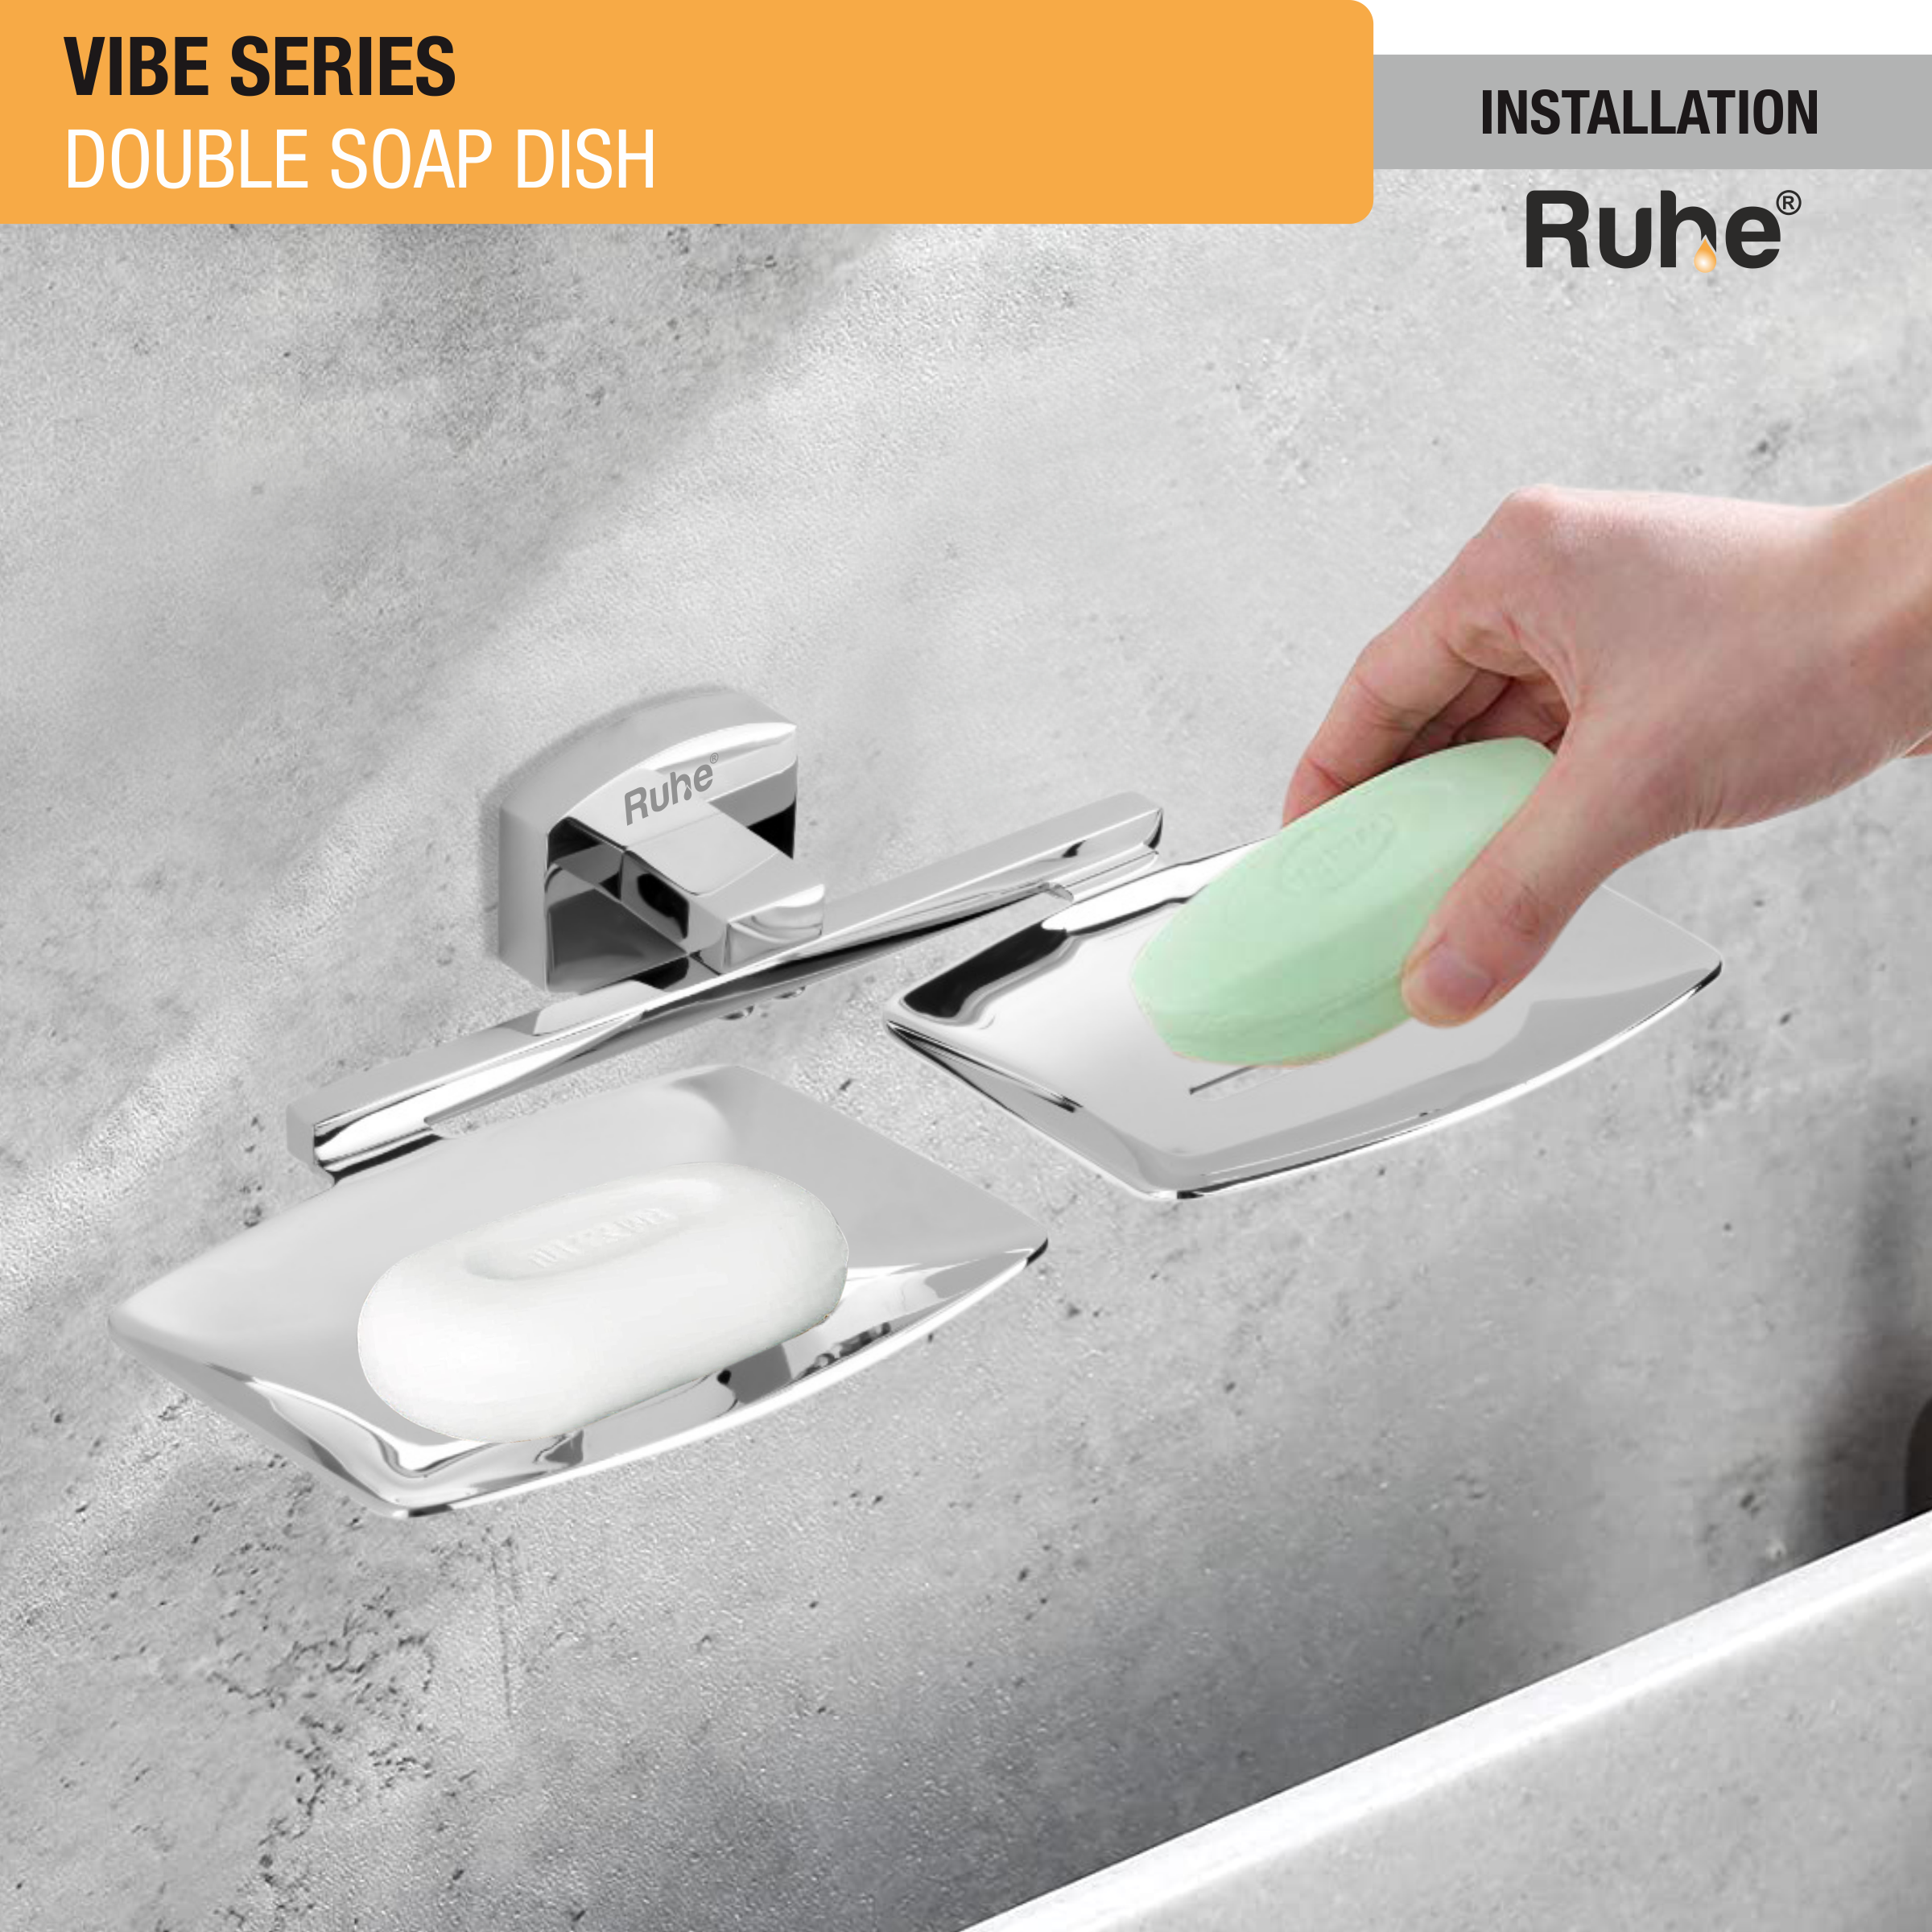 Vibe Brass Double Soap Dish installation